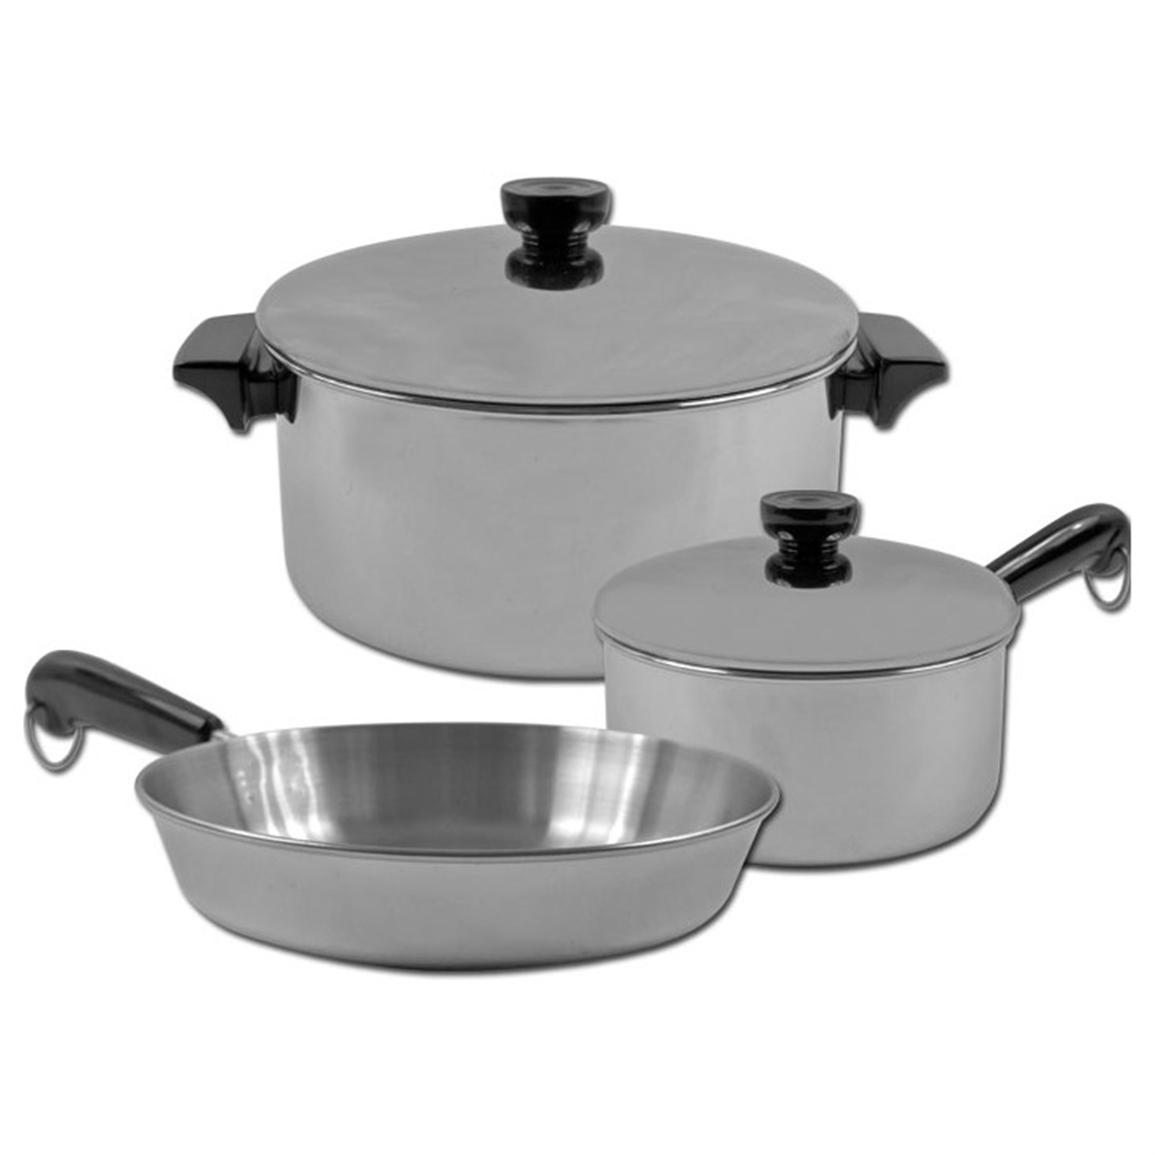 Is Revere Ware Stainless Steel Or Aluminum